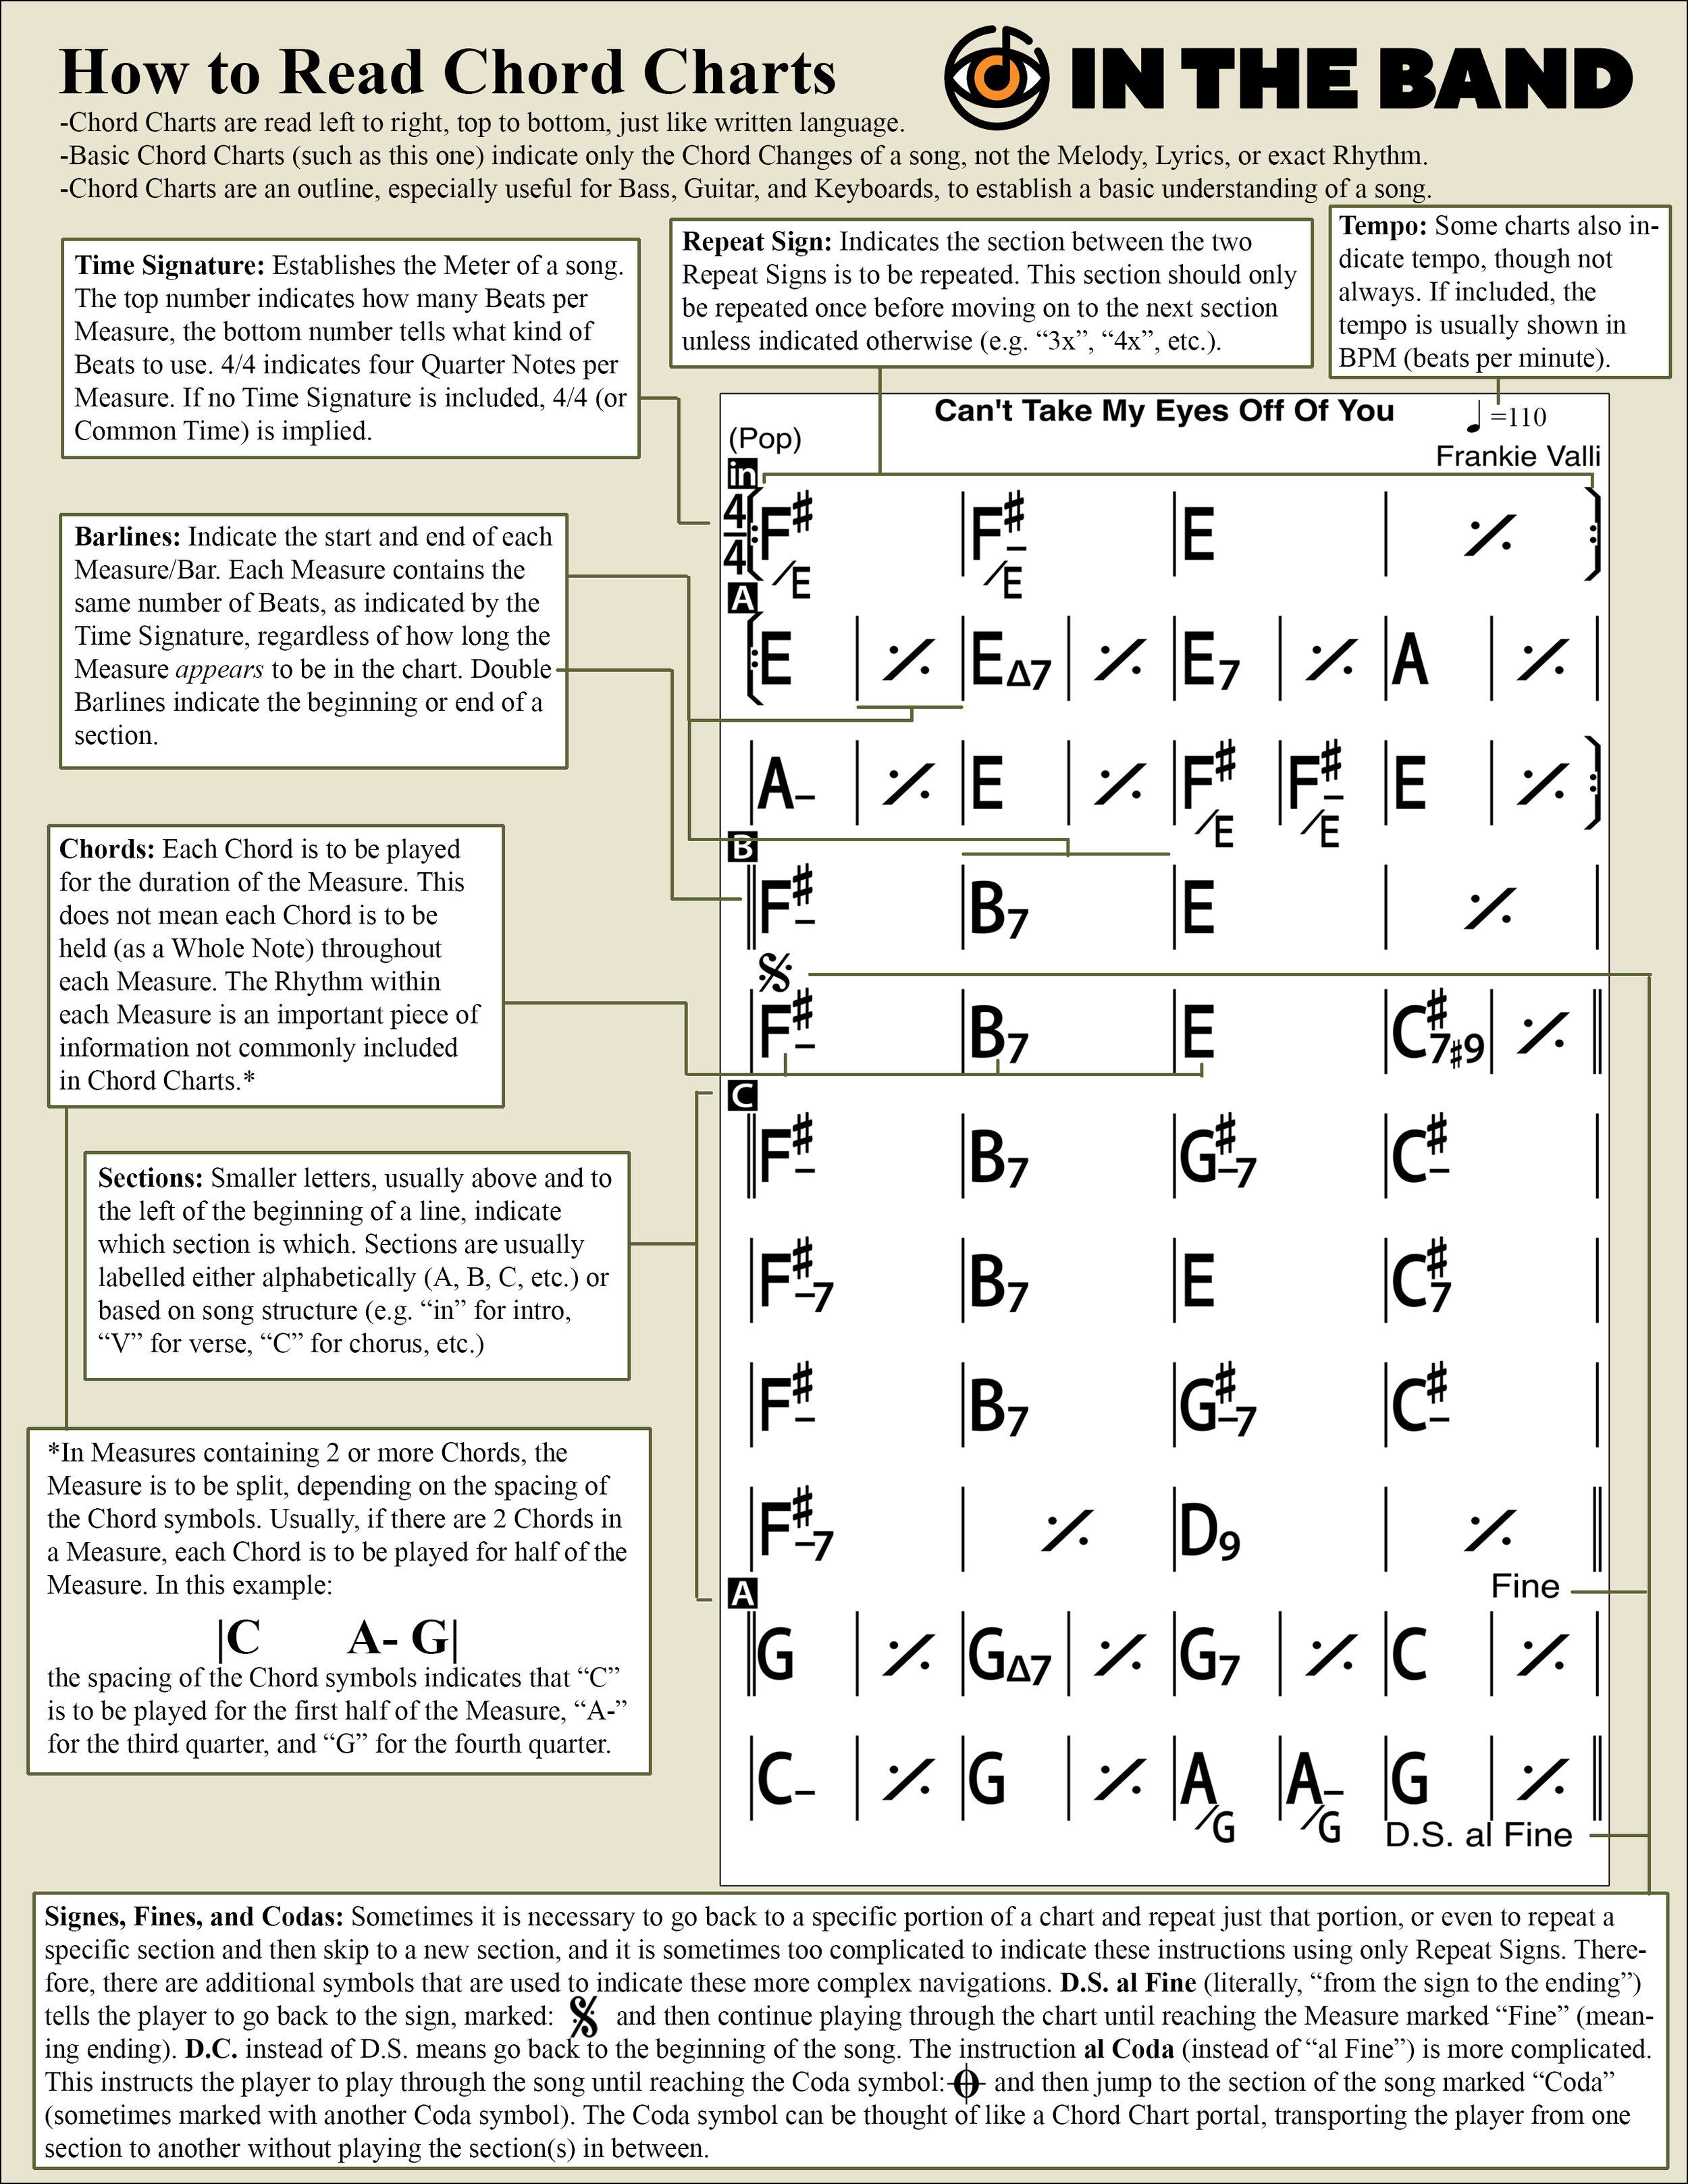 How to Read Chord Charts